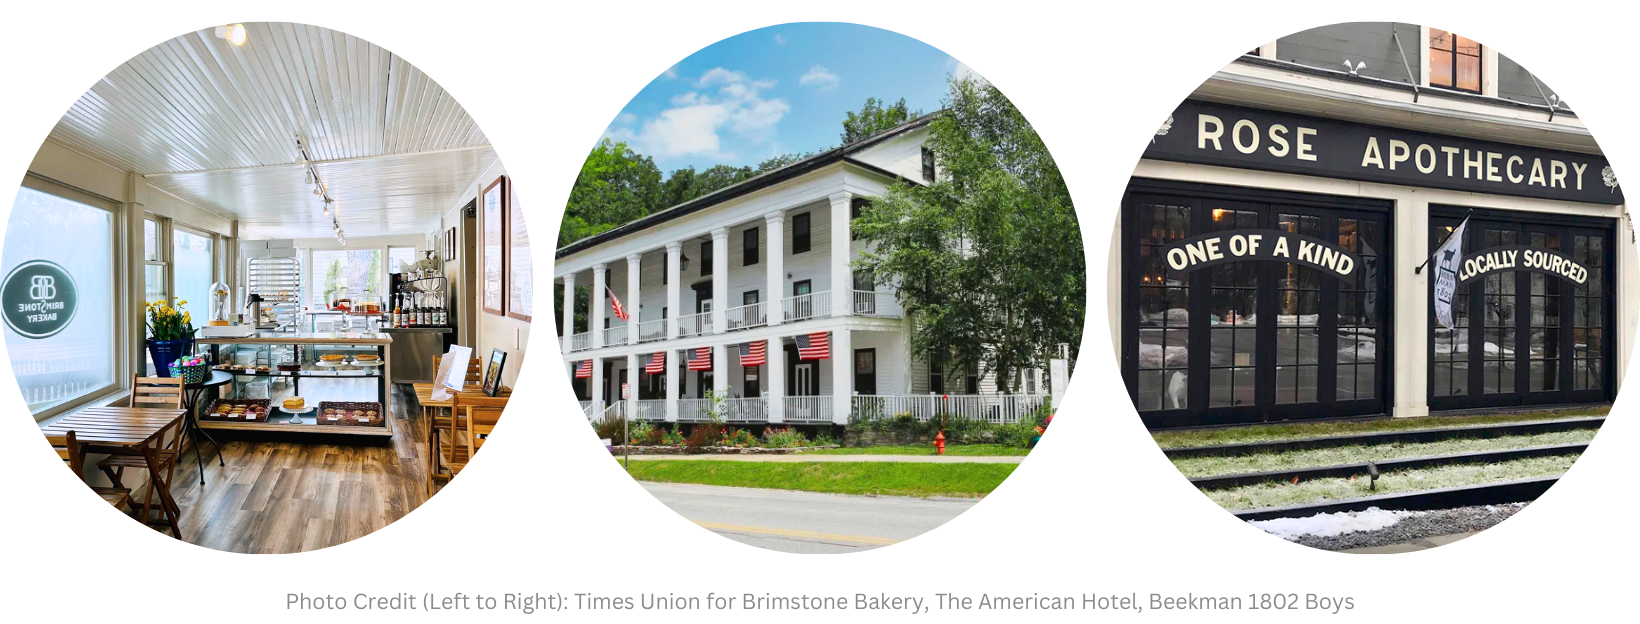 Highlights of Sharon Springs: Brimstone Bakery, The American Hotel, and Beekman 1802